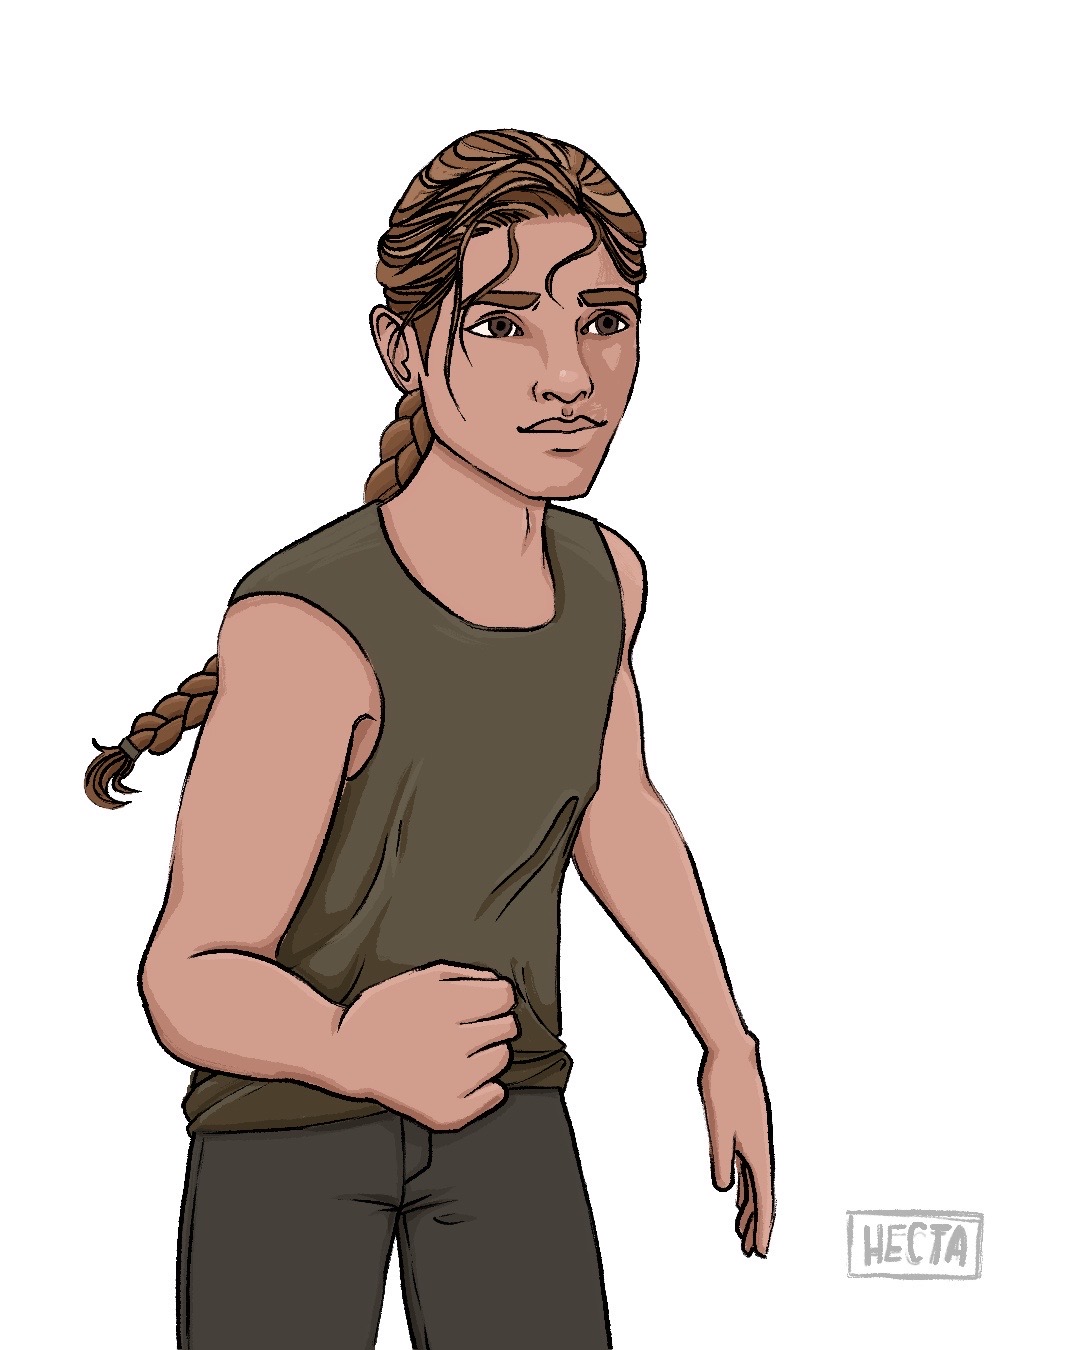 Abby - The Last Of Us Part 2 by Reikayr on DeviantArt